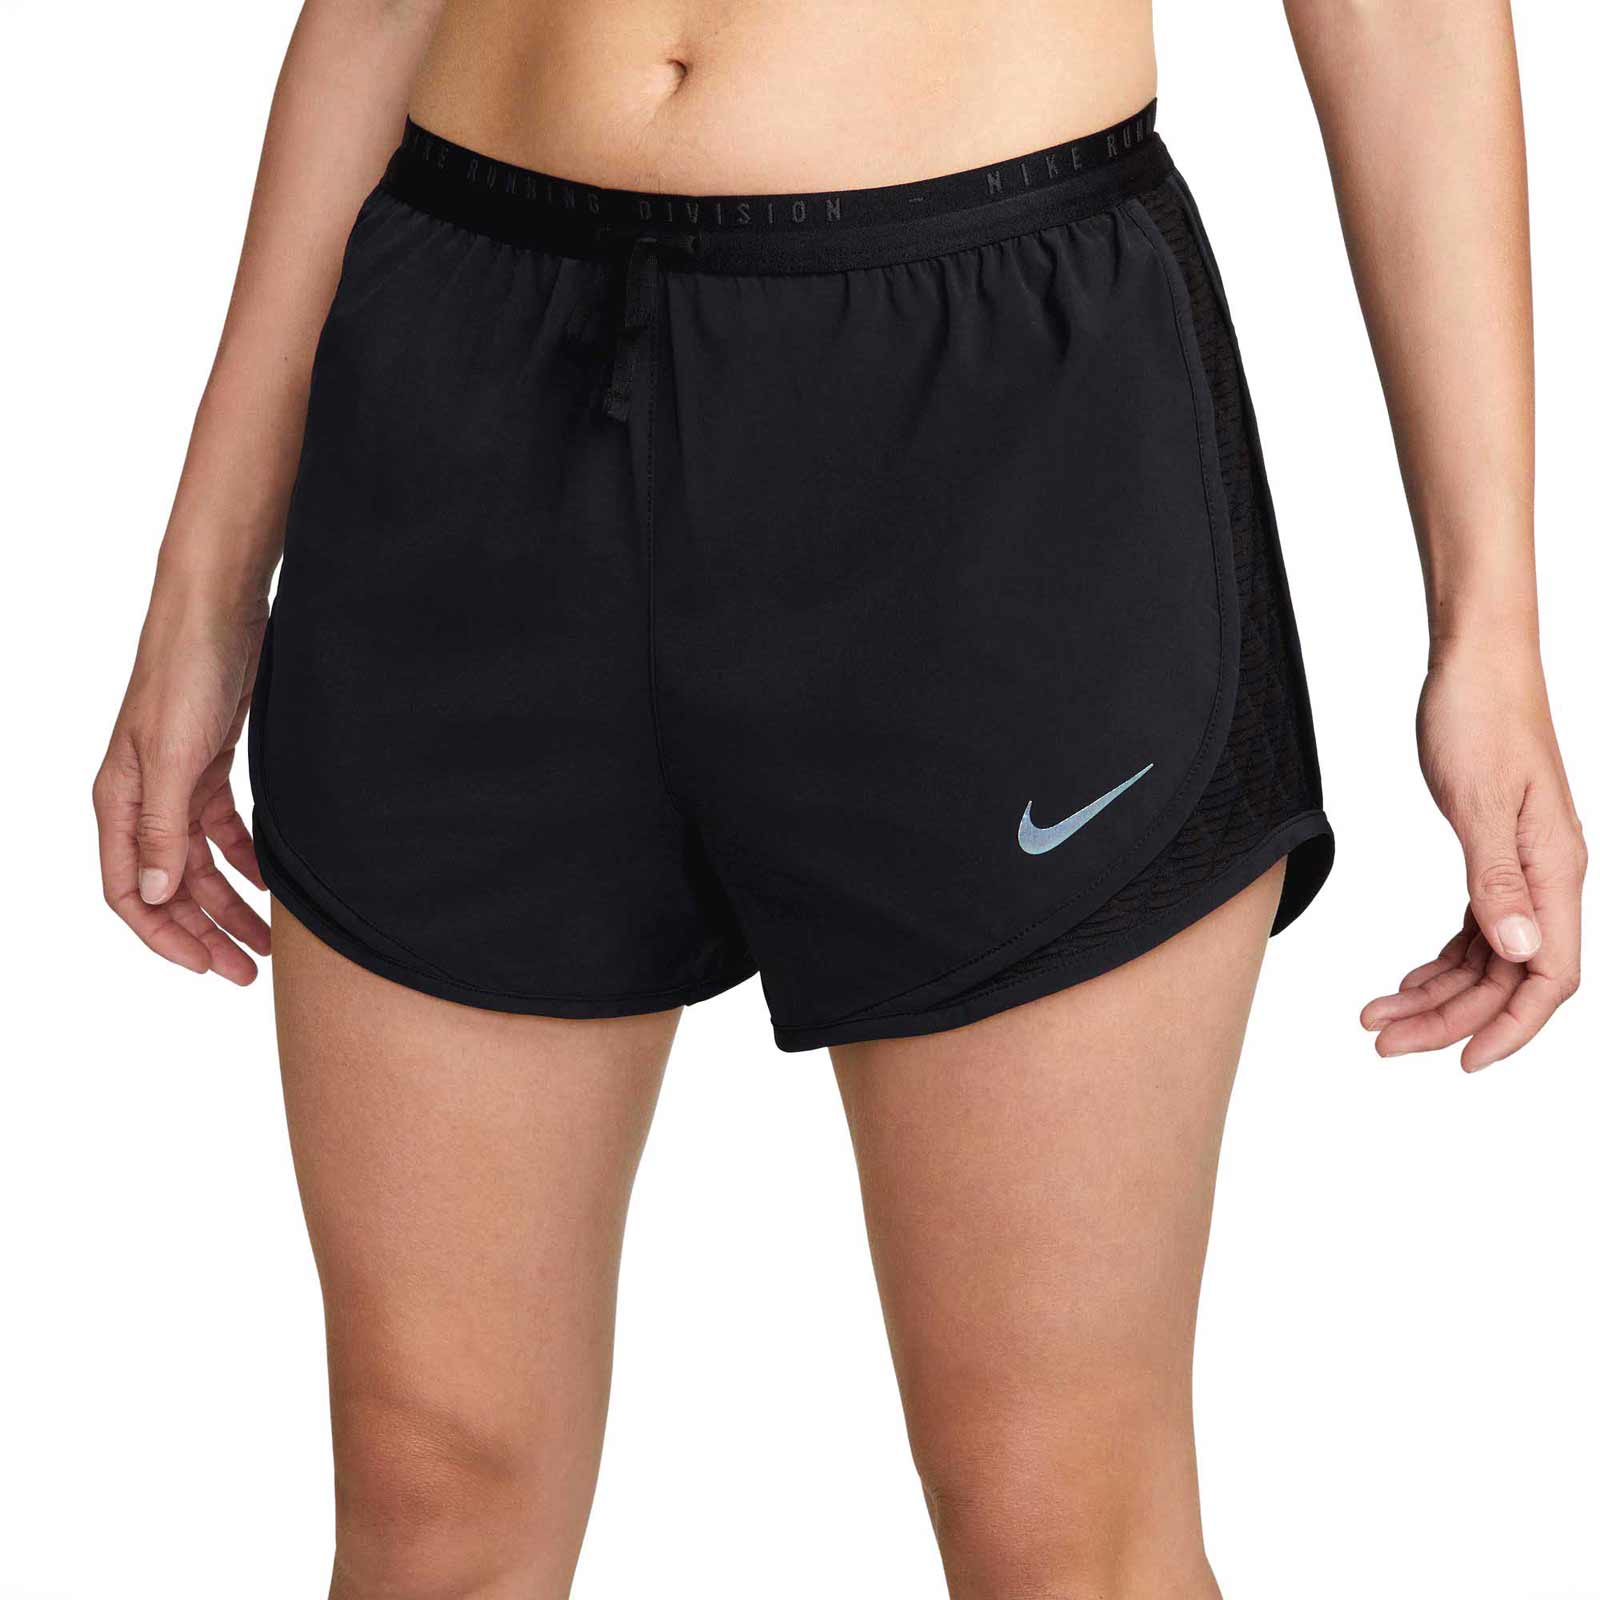 NIKE DRI-FIT RUN DIVISION TEMPO LUXE WOMENS RUNNING SHORTS